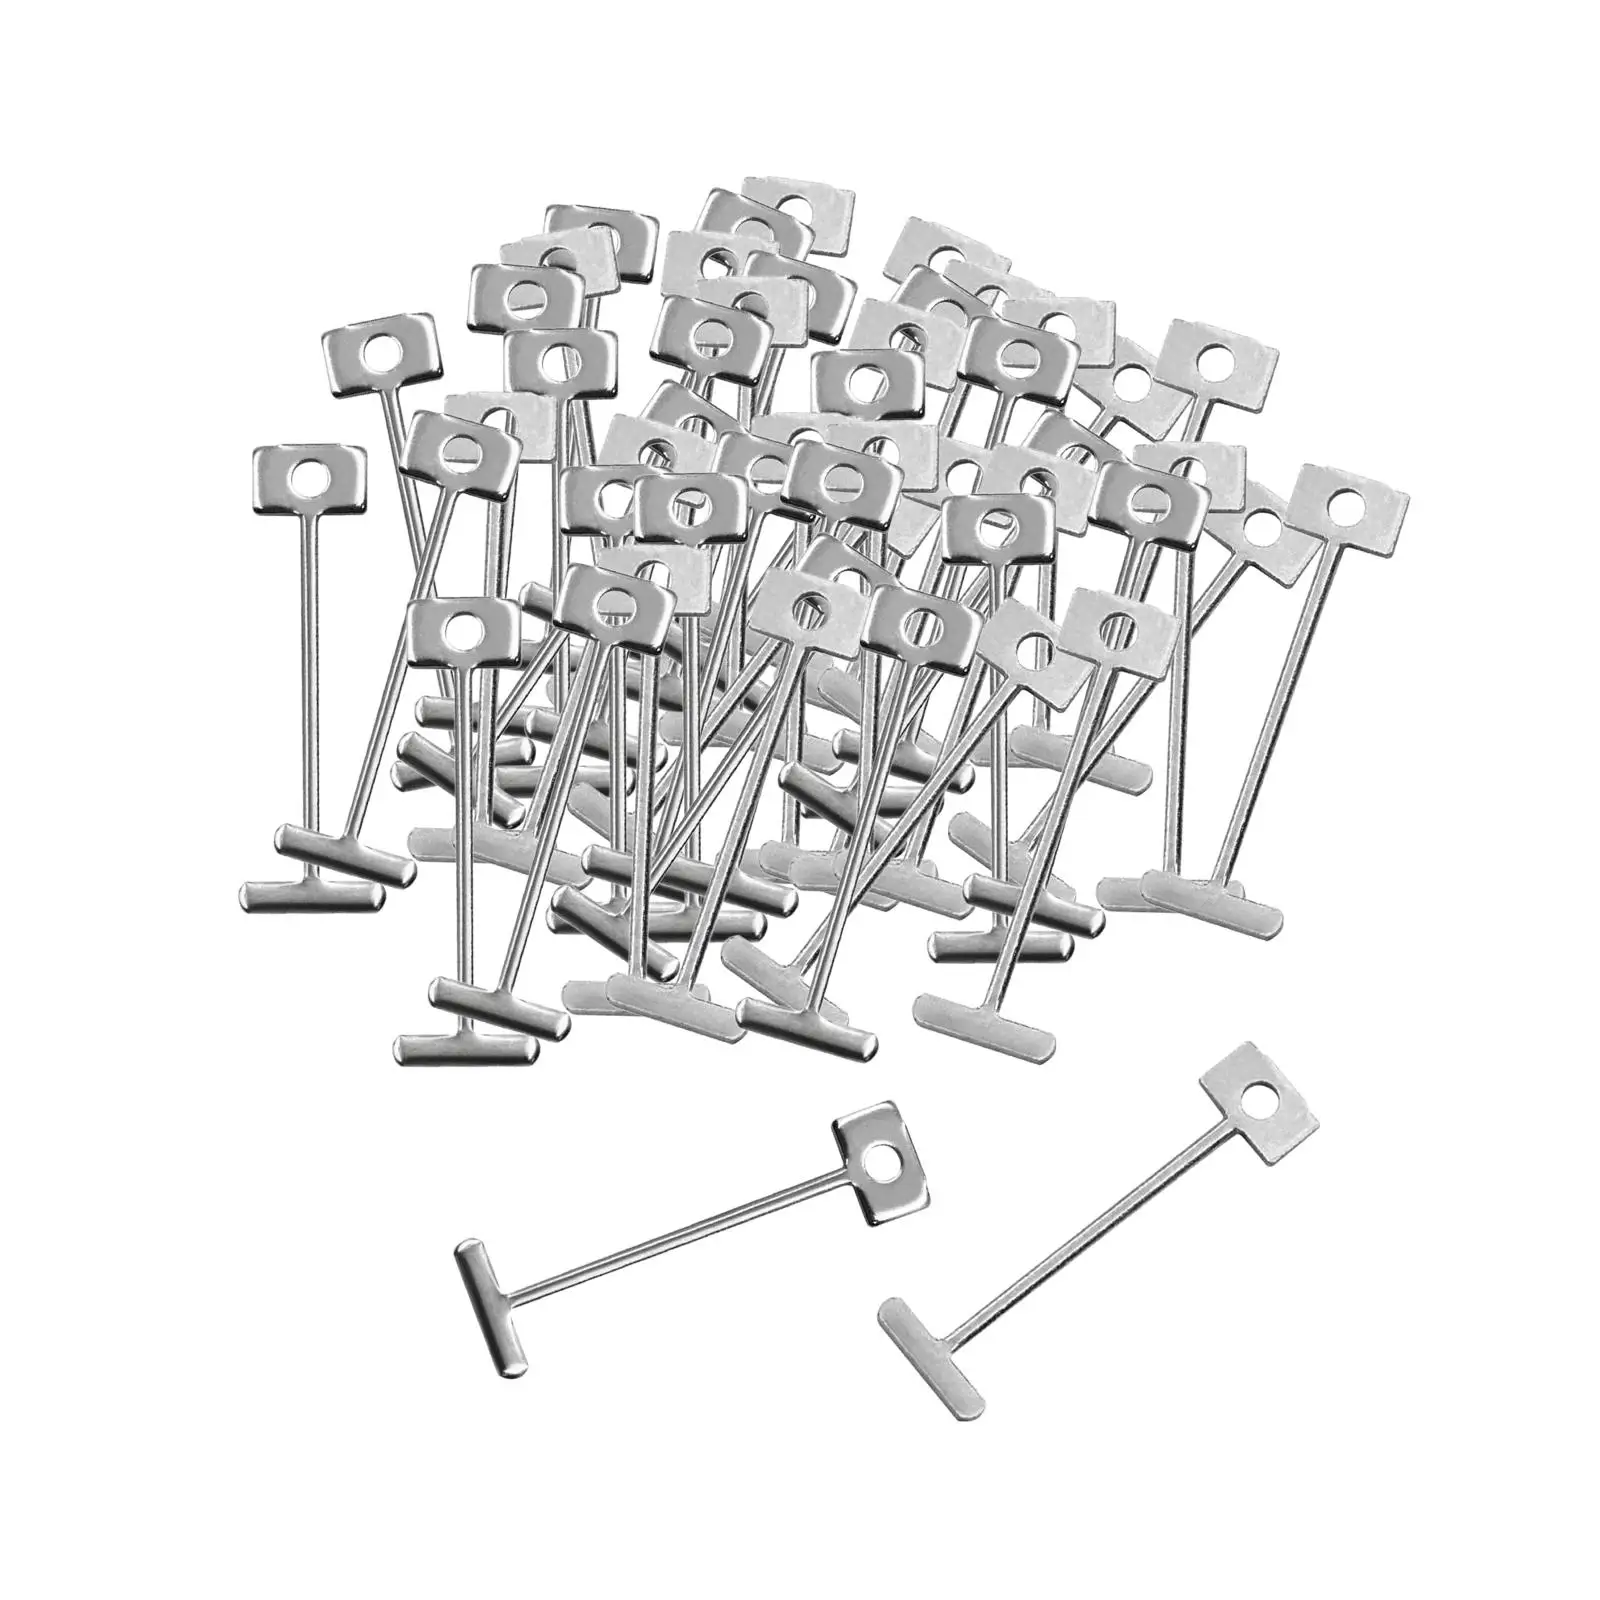 50Pcs Replacement Tile Leveling System T Pins for Builing Walls & Floors Tiling Construction Tools